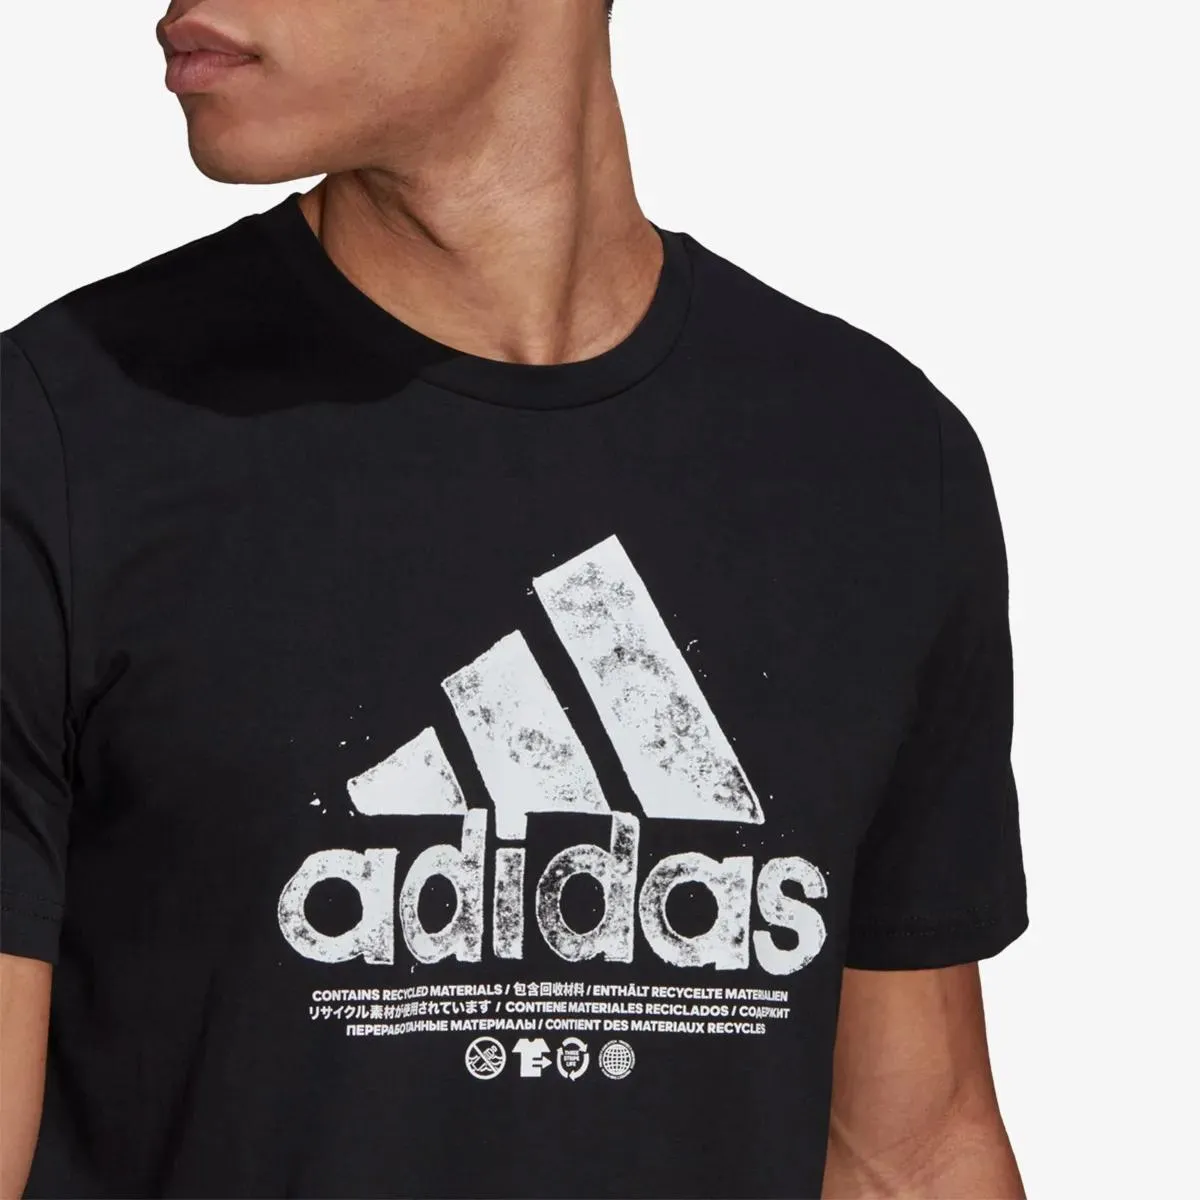 adidas T-shirt RECYCLED COTTON LOGO GRAPHIC 